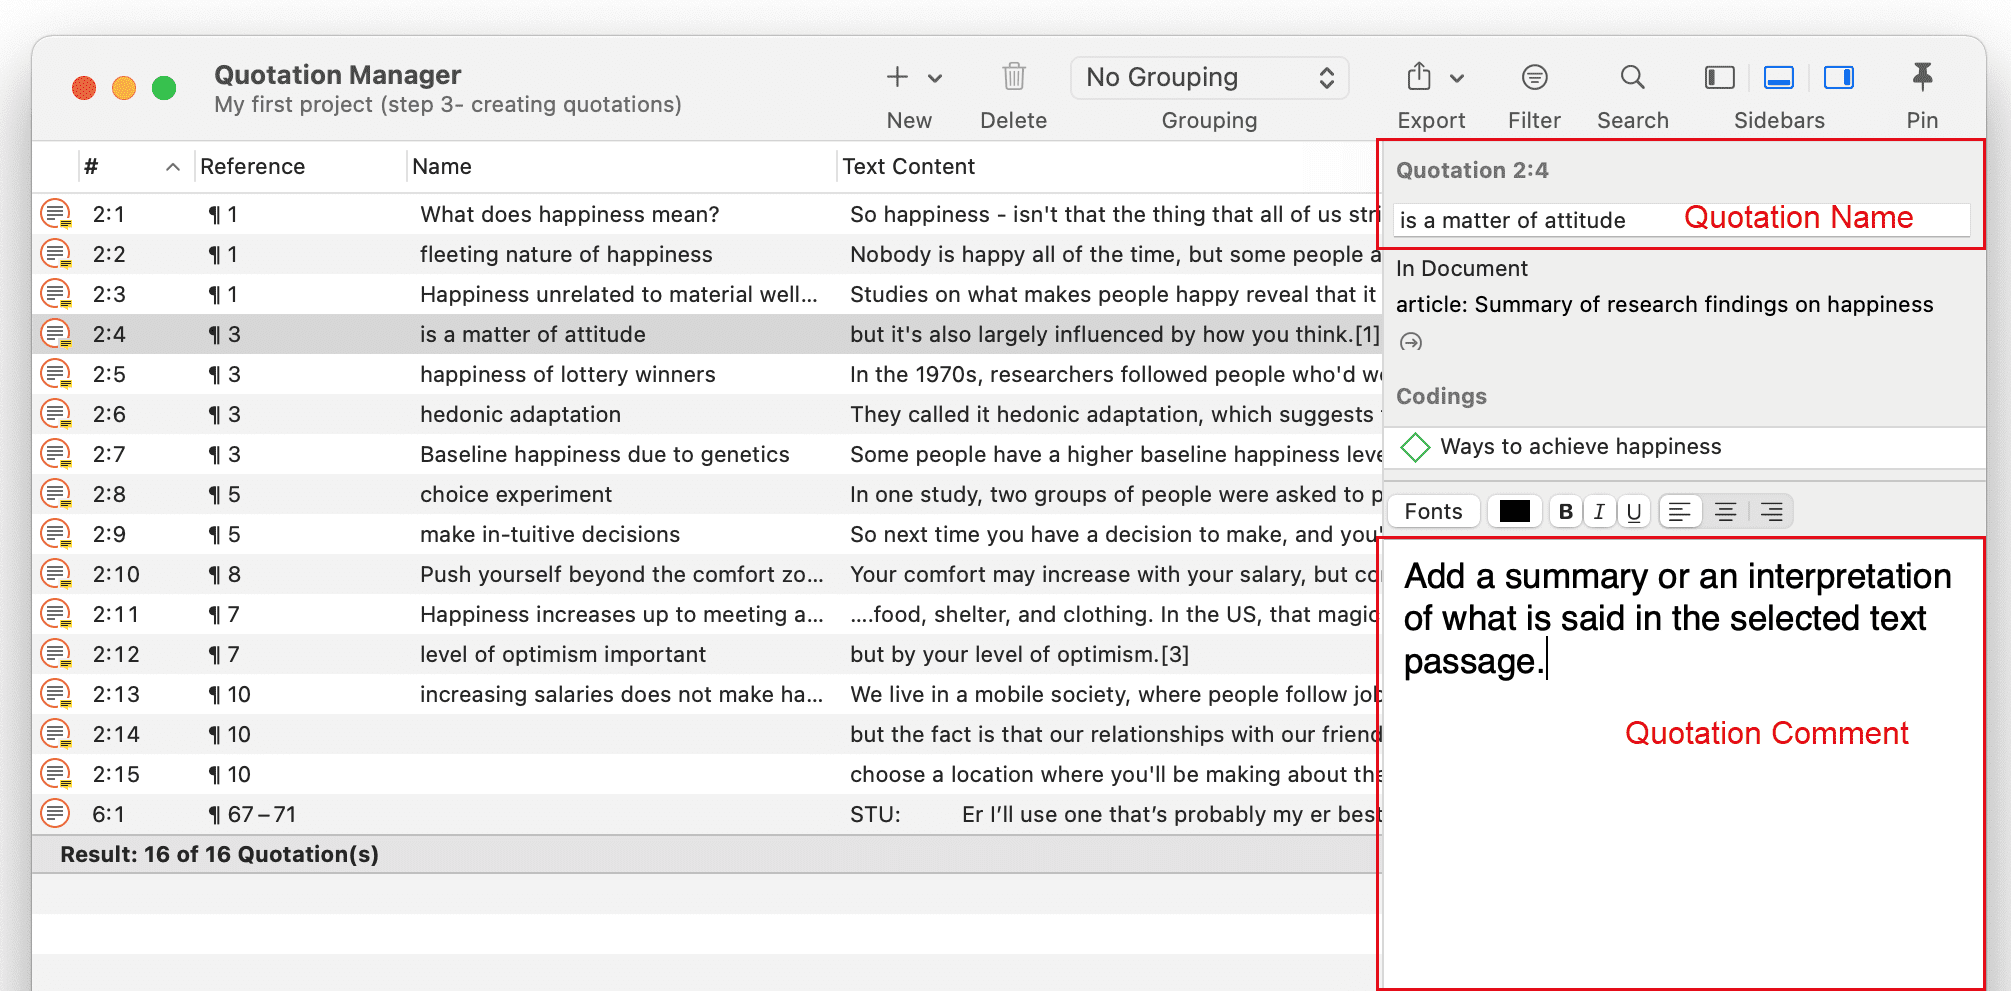 Adding quotation names and comments